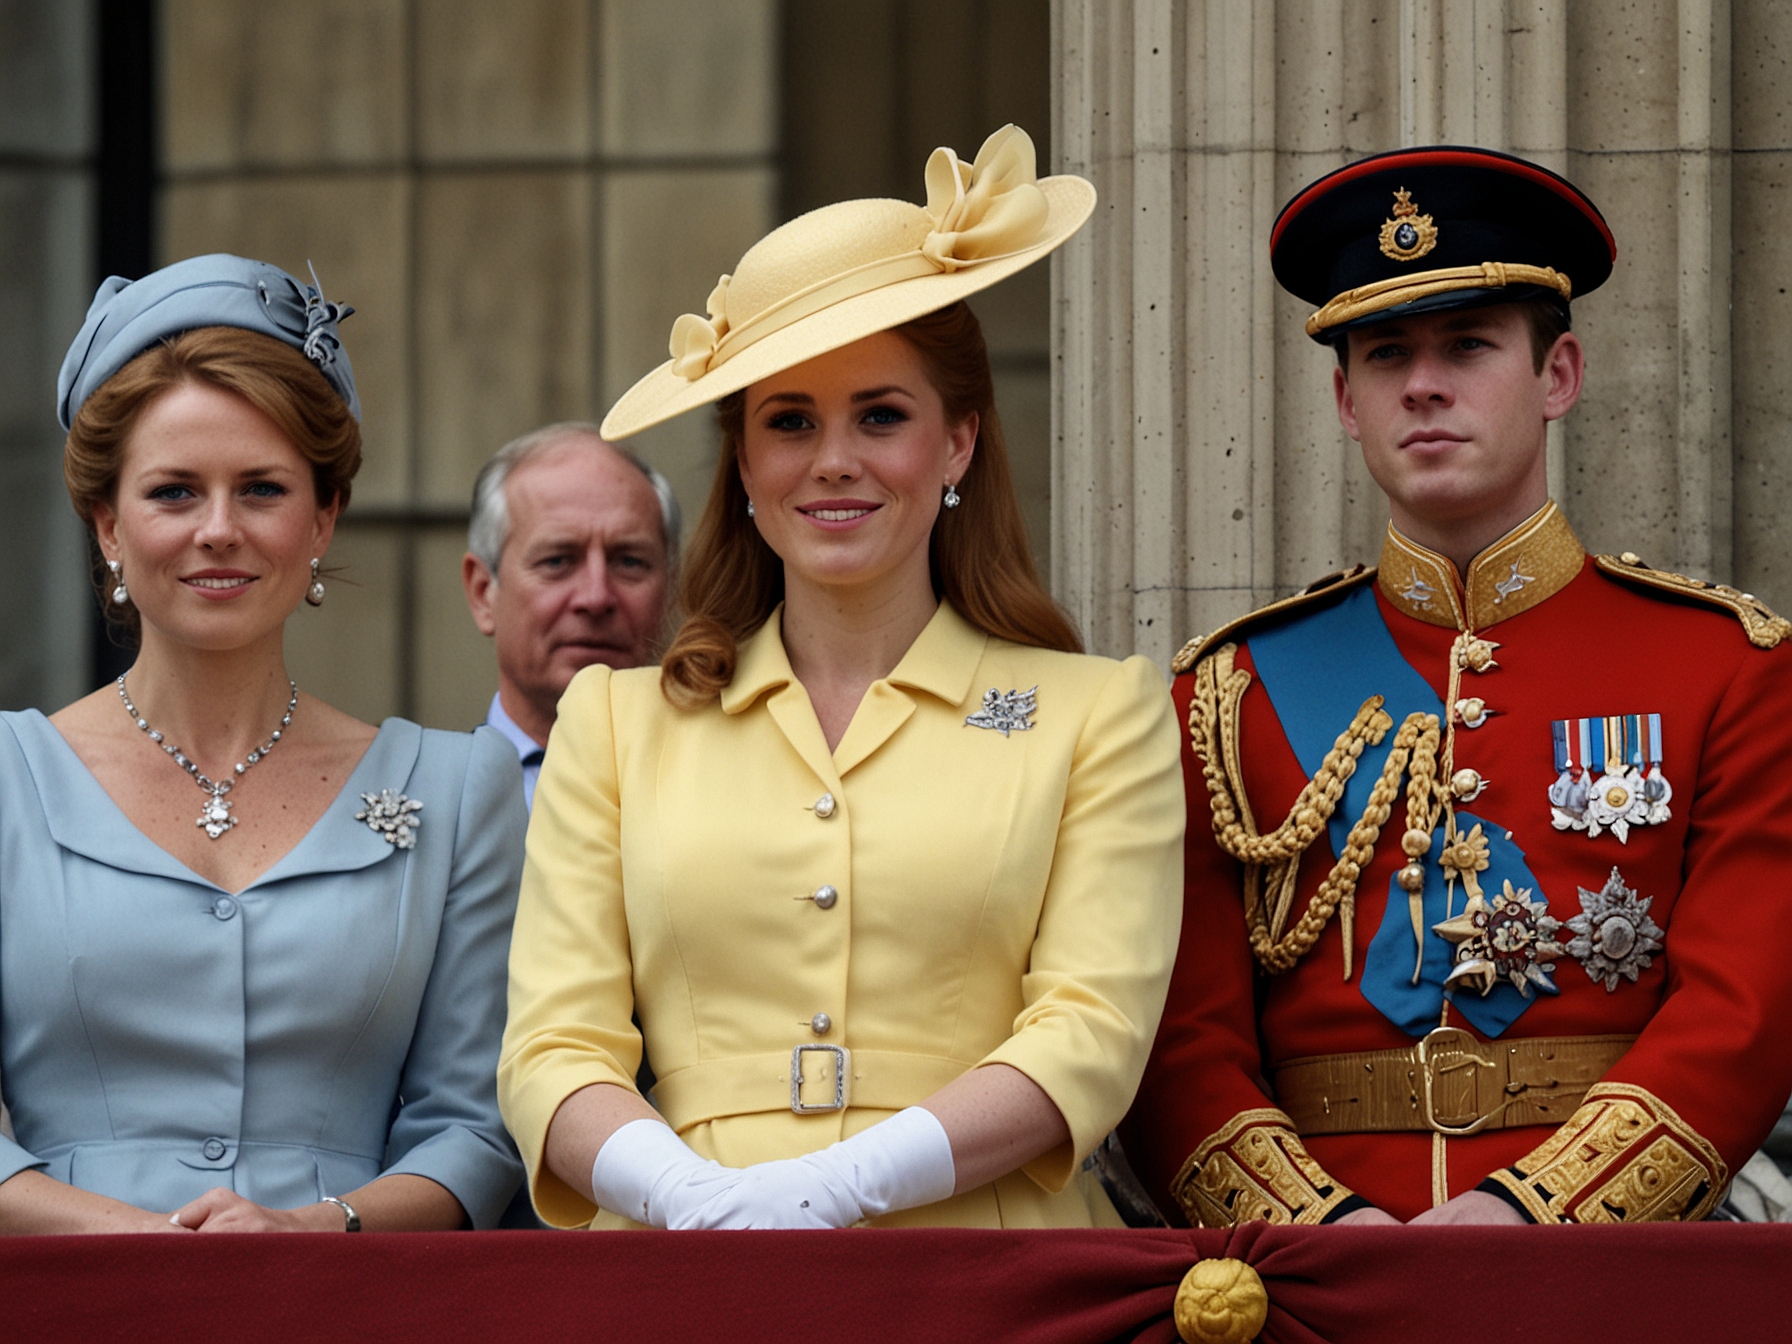 Buckingham Palace balcony during Trooping the Colour with working members of the royal family, highlighting the absence of Prince Harry, Prince Andrew, and Duchess Sarah Ferguson.